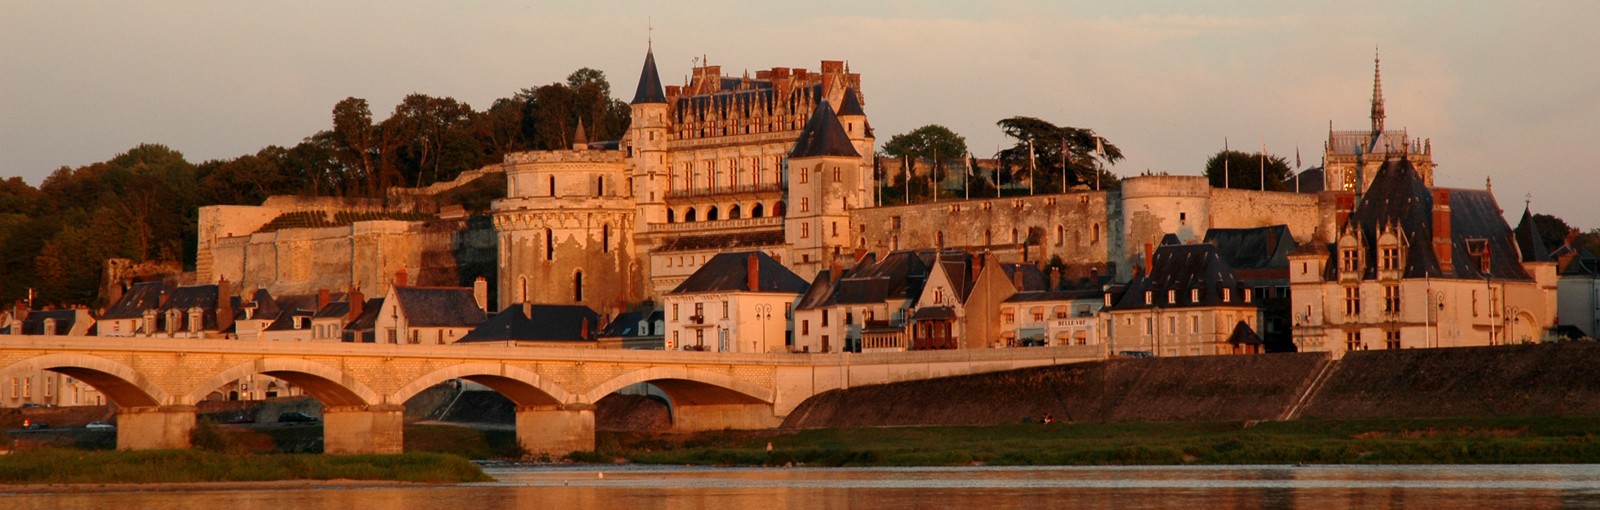 Tours LEONARDO DA VINCI AND WINES FROM AMBOISE - Full days - Day tours from Paris